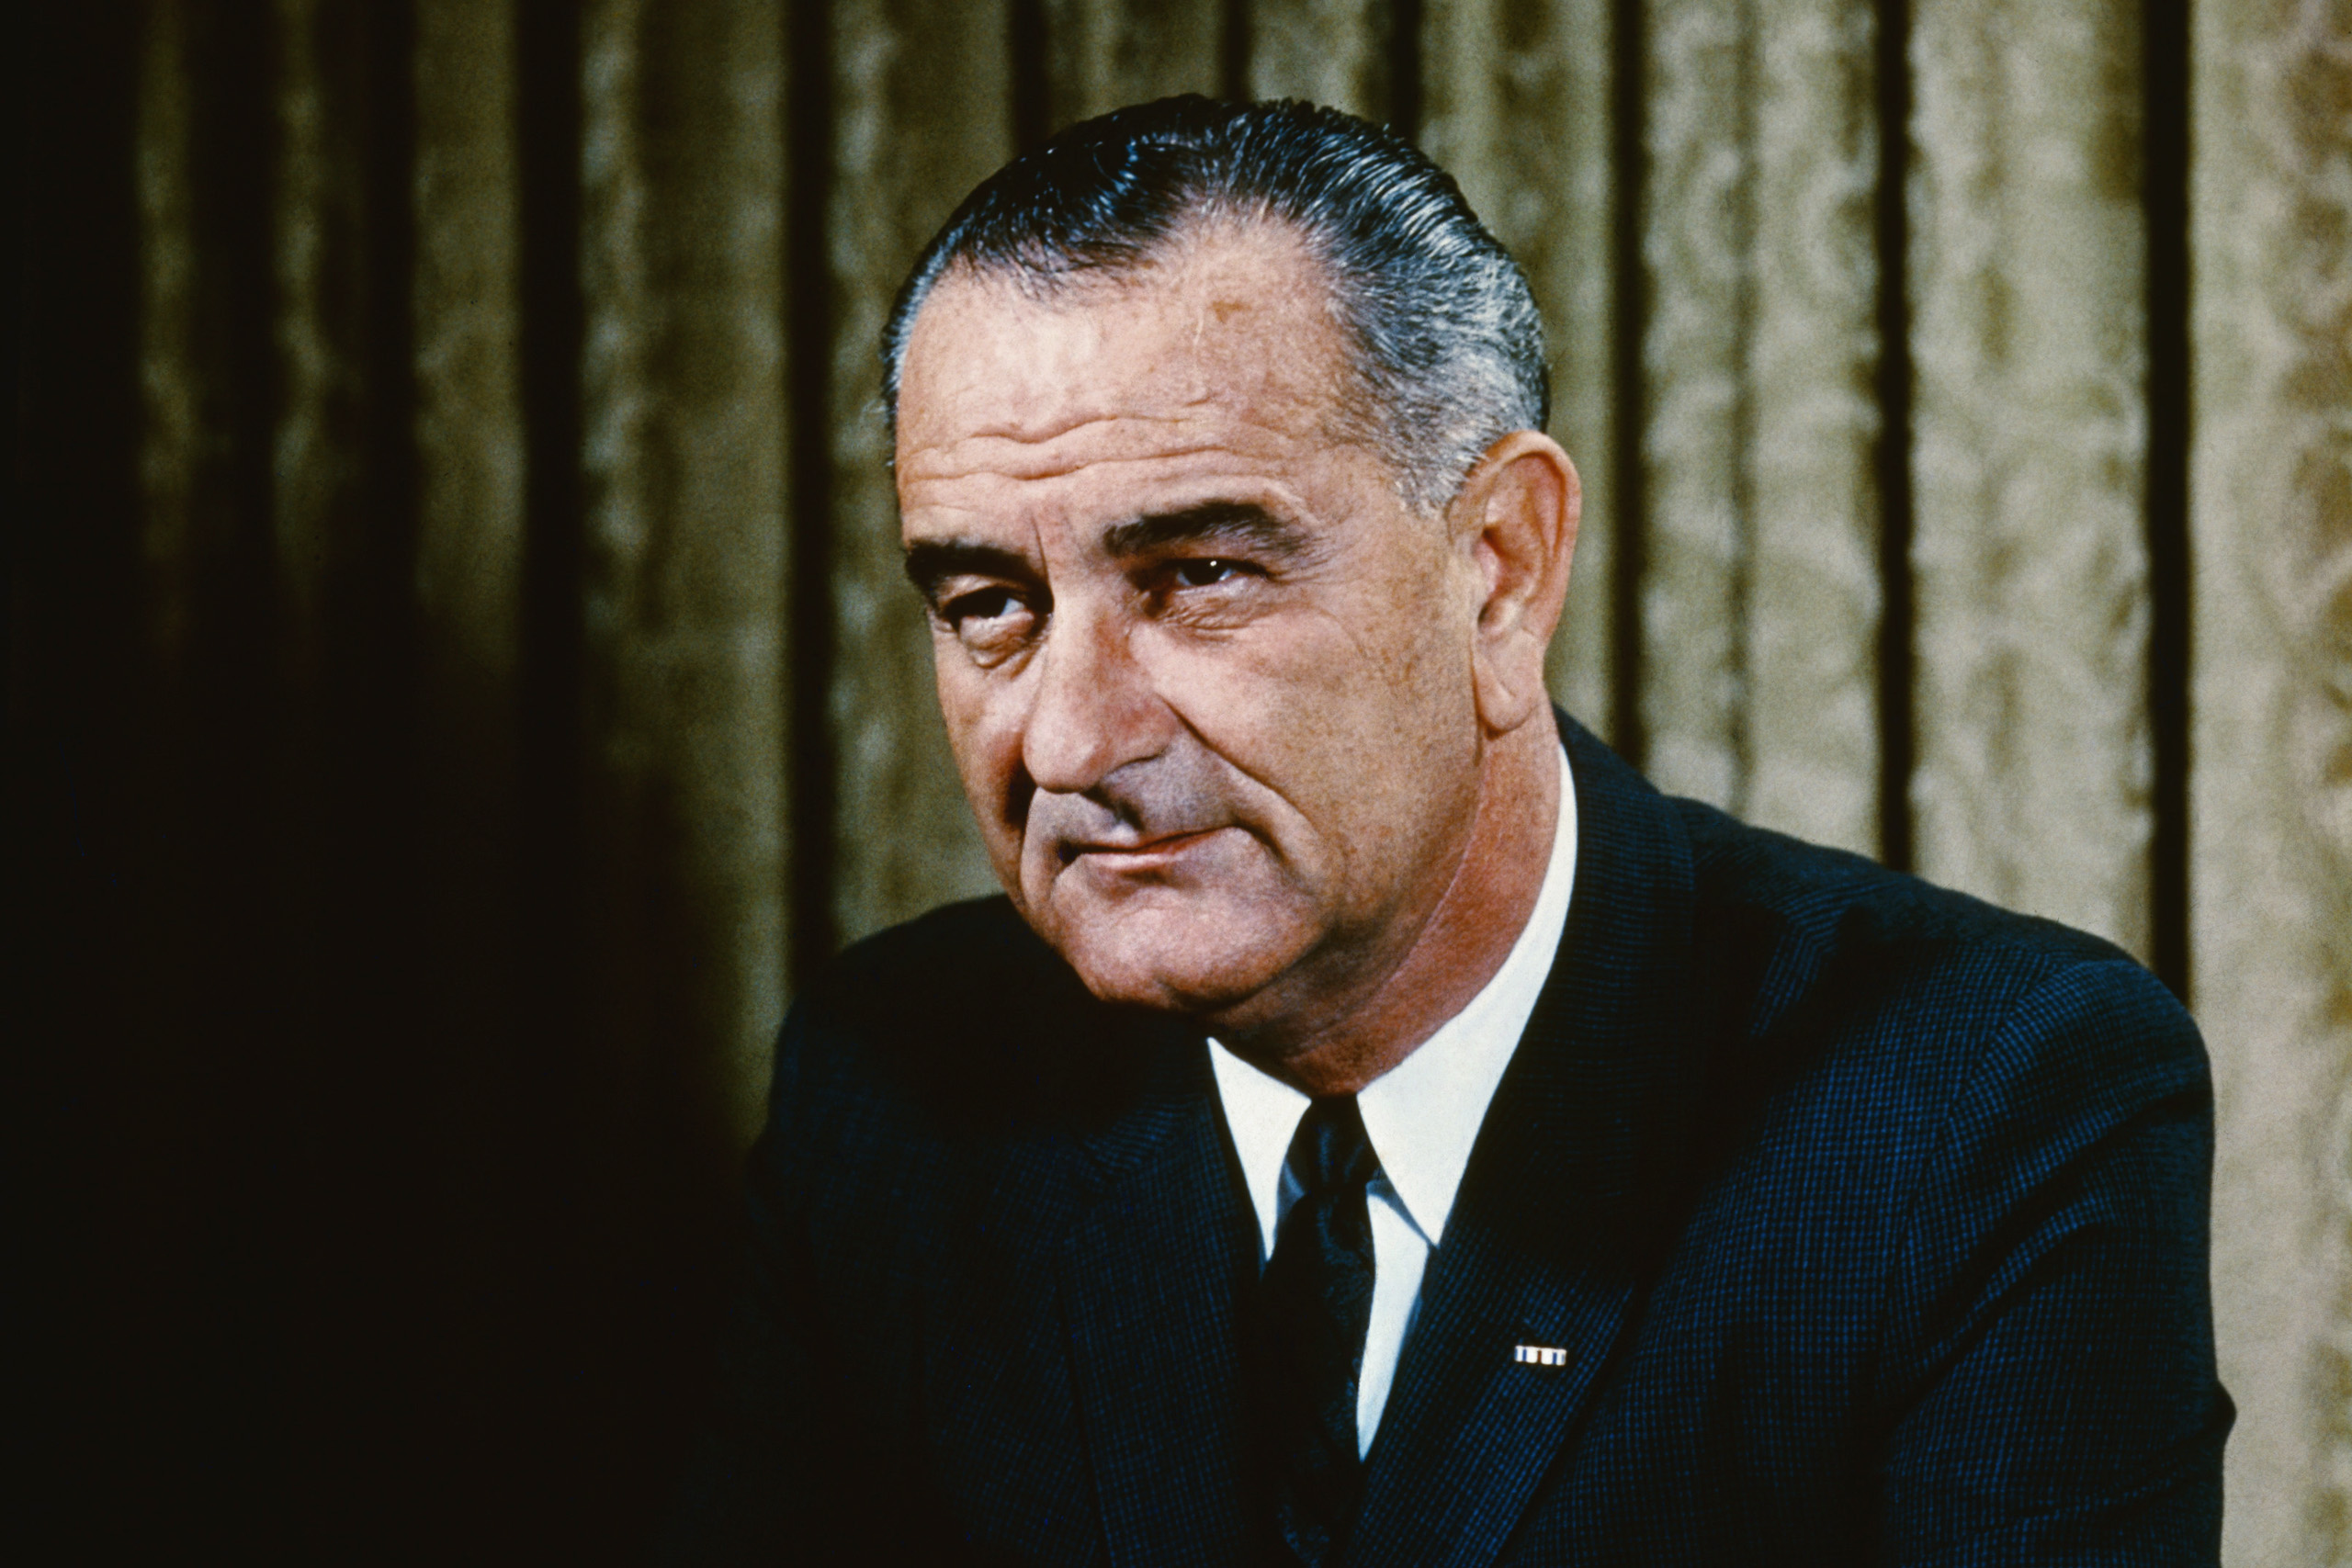 Newly released JFK files reveal Democrat President Lyndon Johnson was a member of the KKK, which was run by Democrats